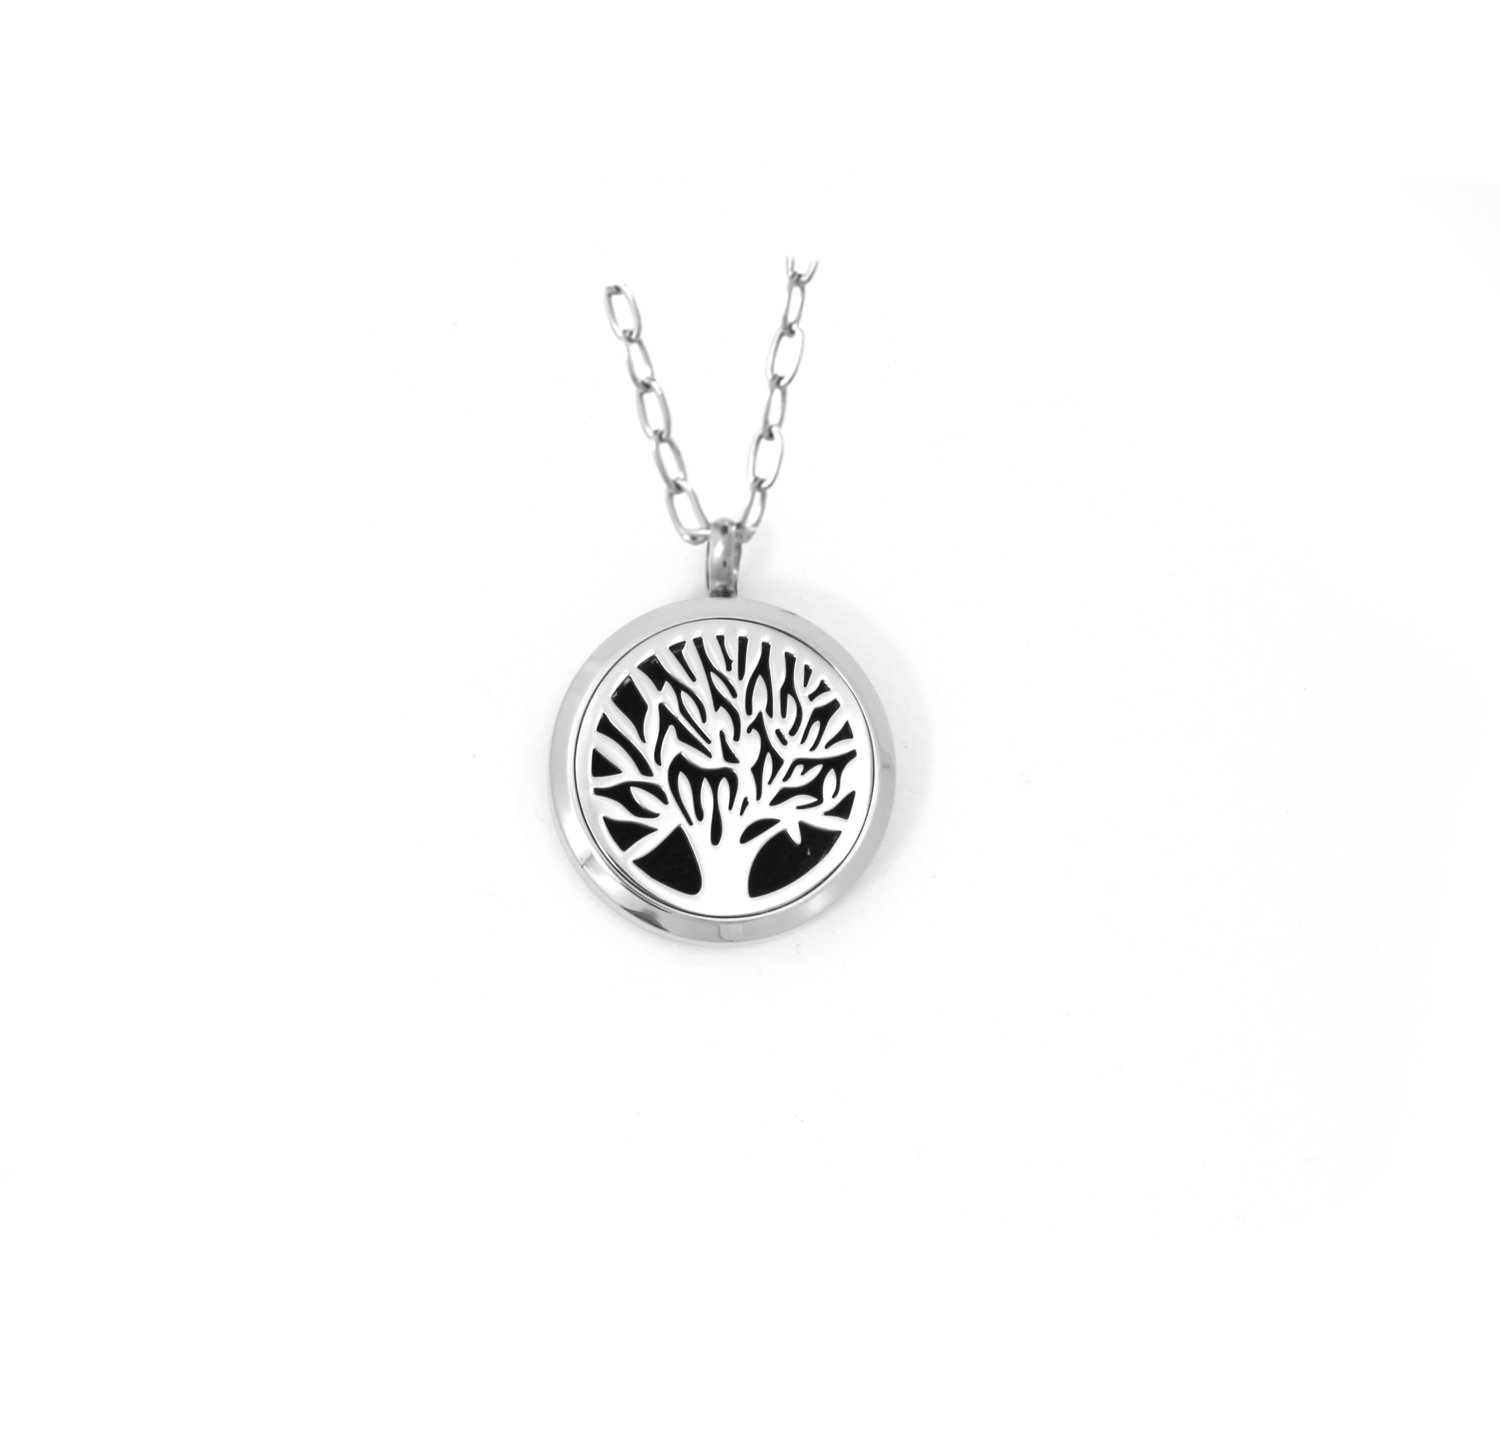 Diffusing Magnetic Tree of Life Pendant - includes Two Leather Inserts